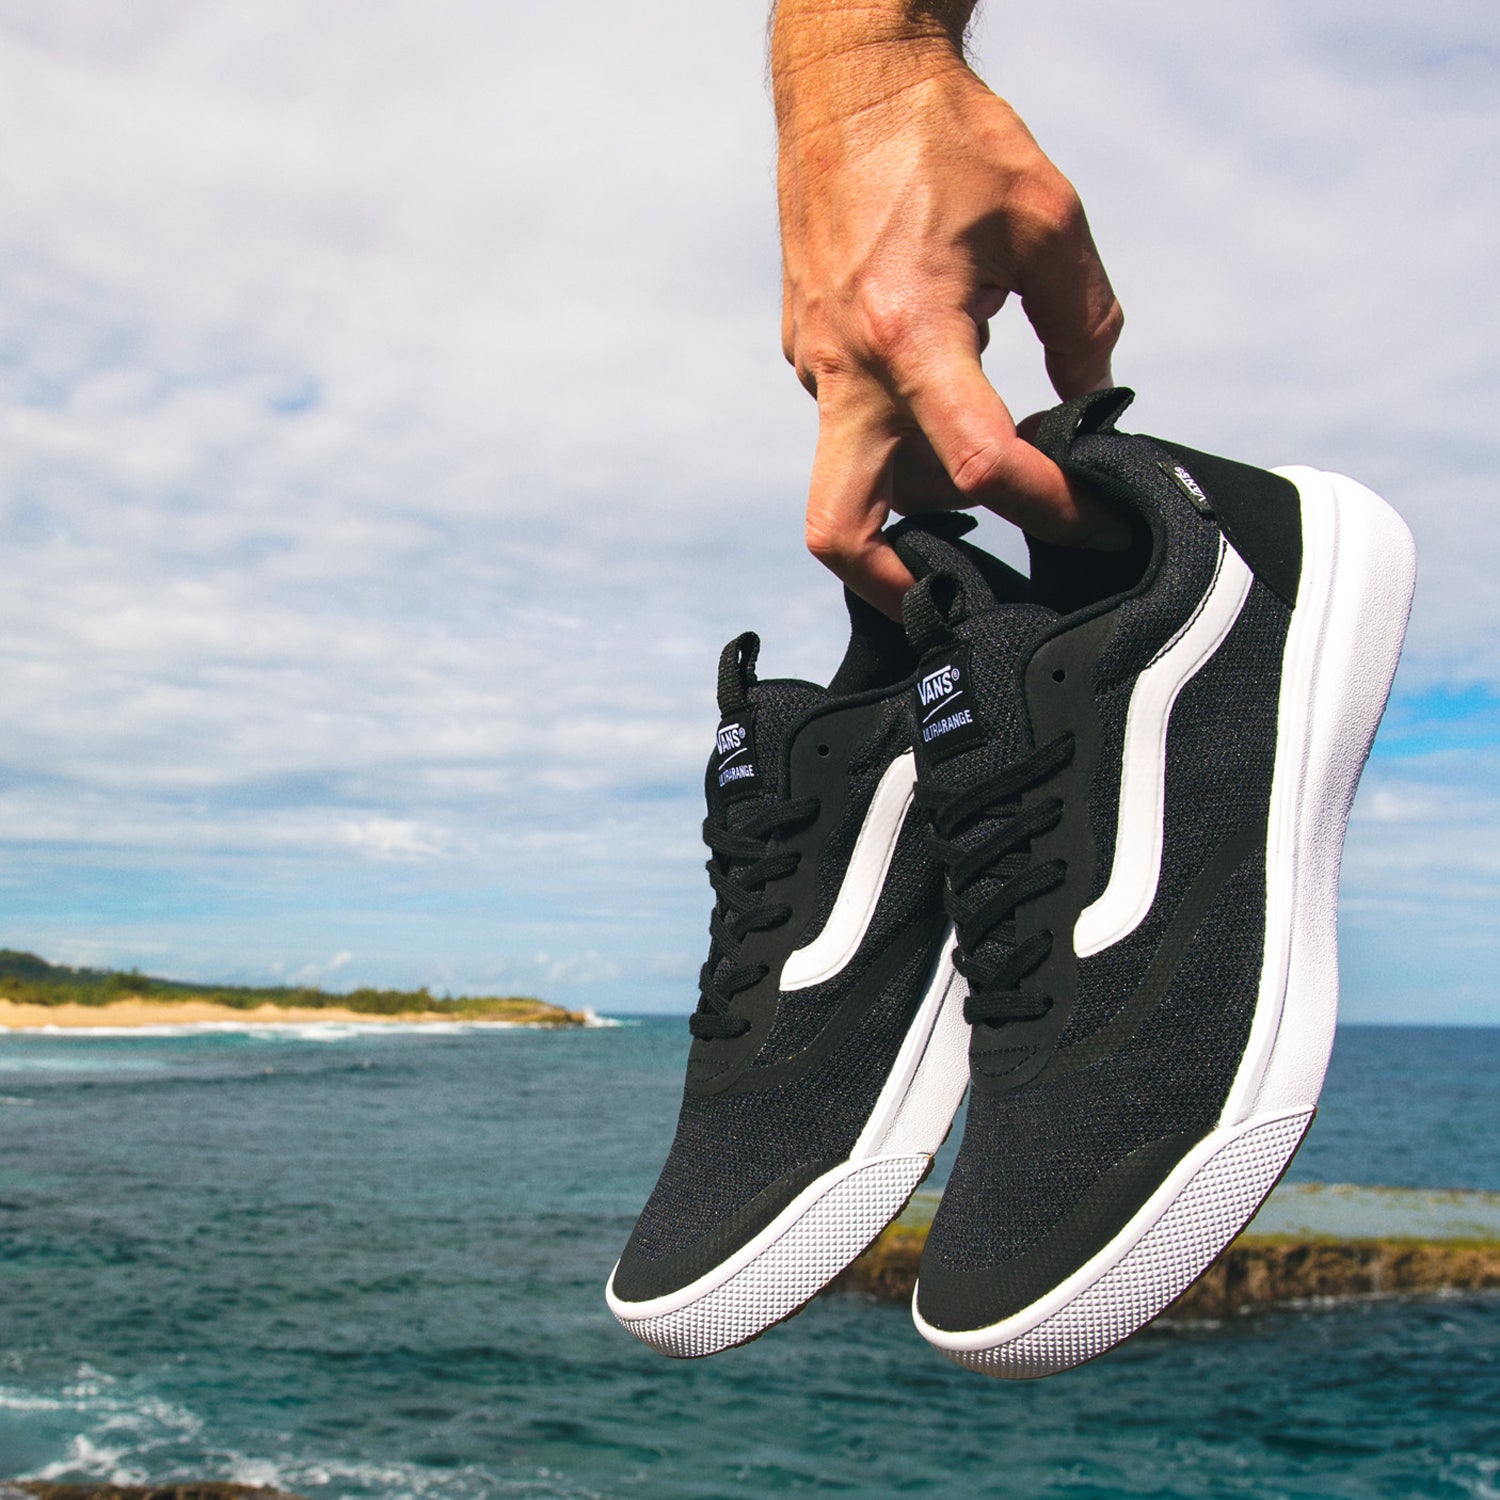 The Vans UltraRange Are the Best Shoes for Traveling - Outside Online